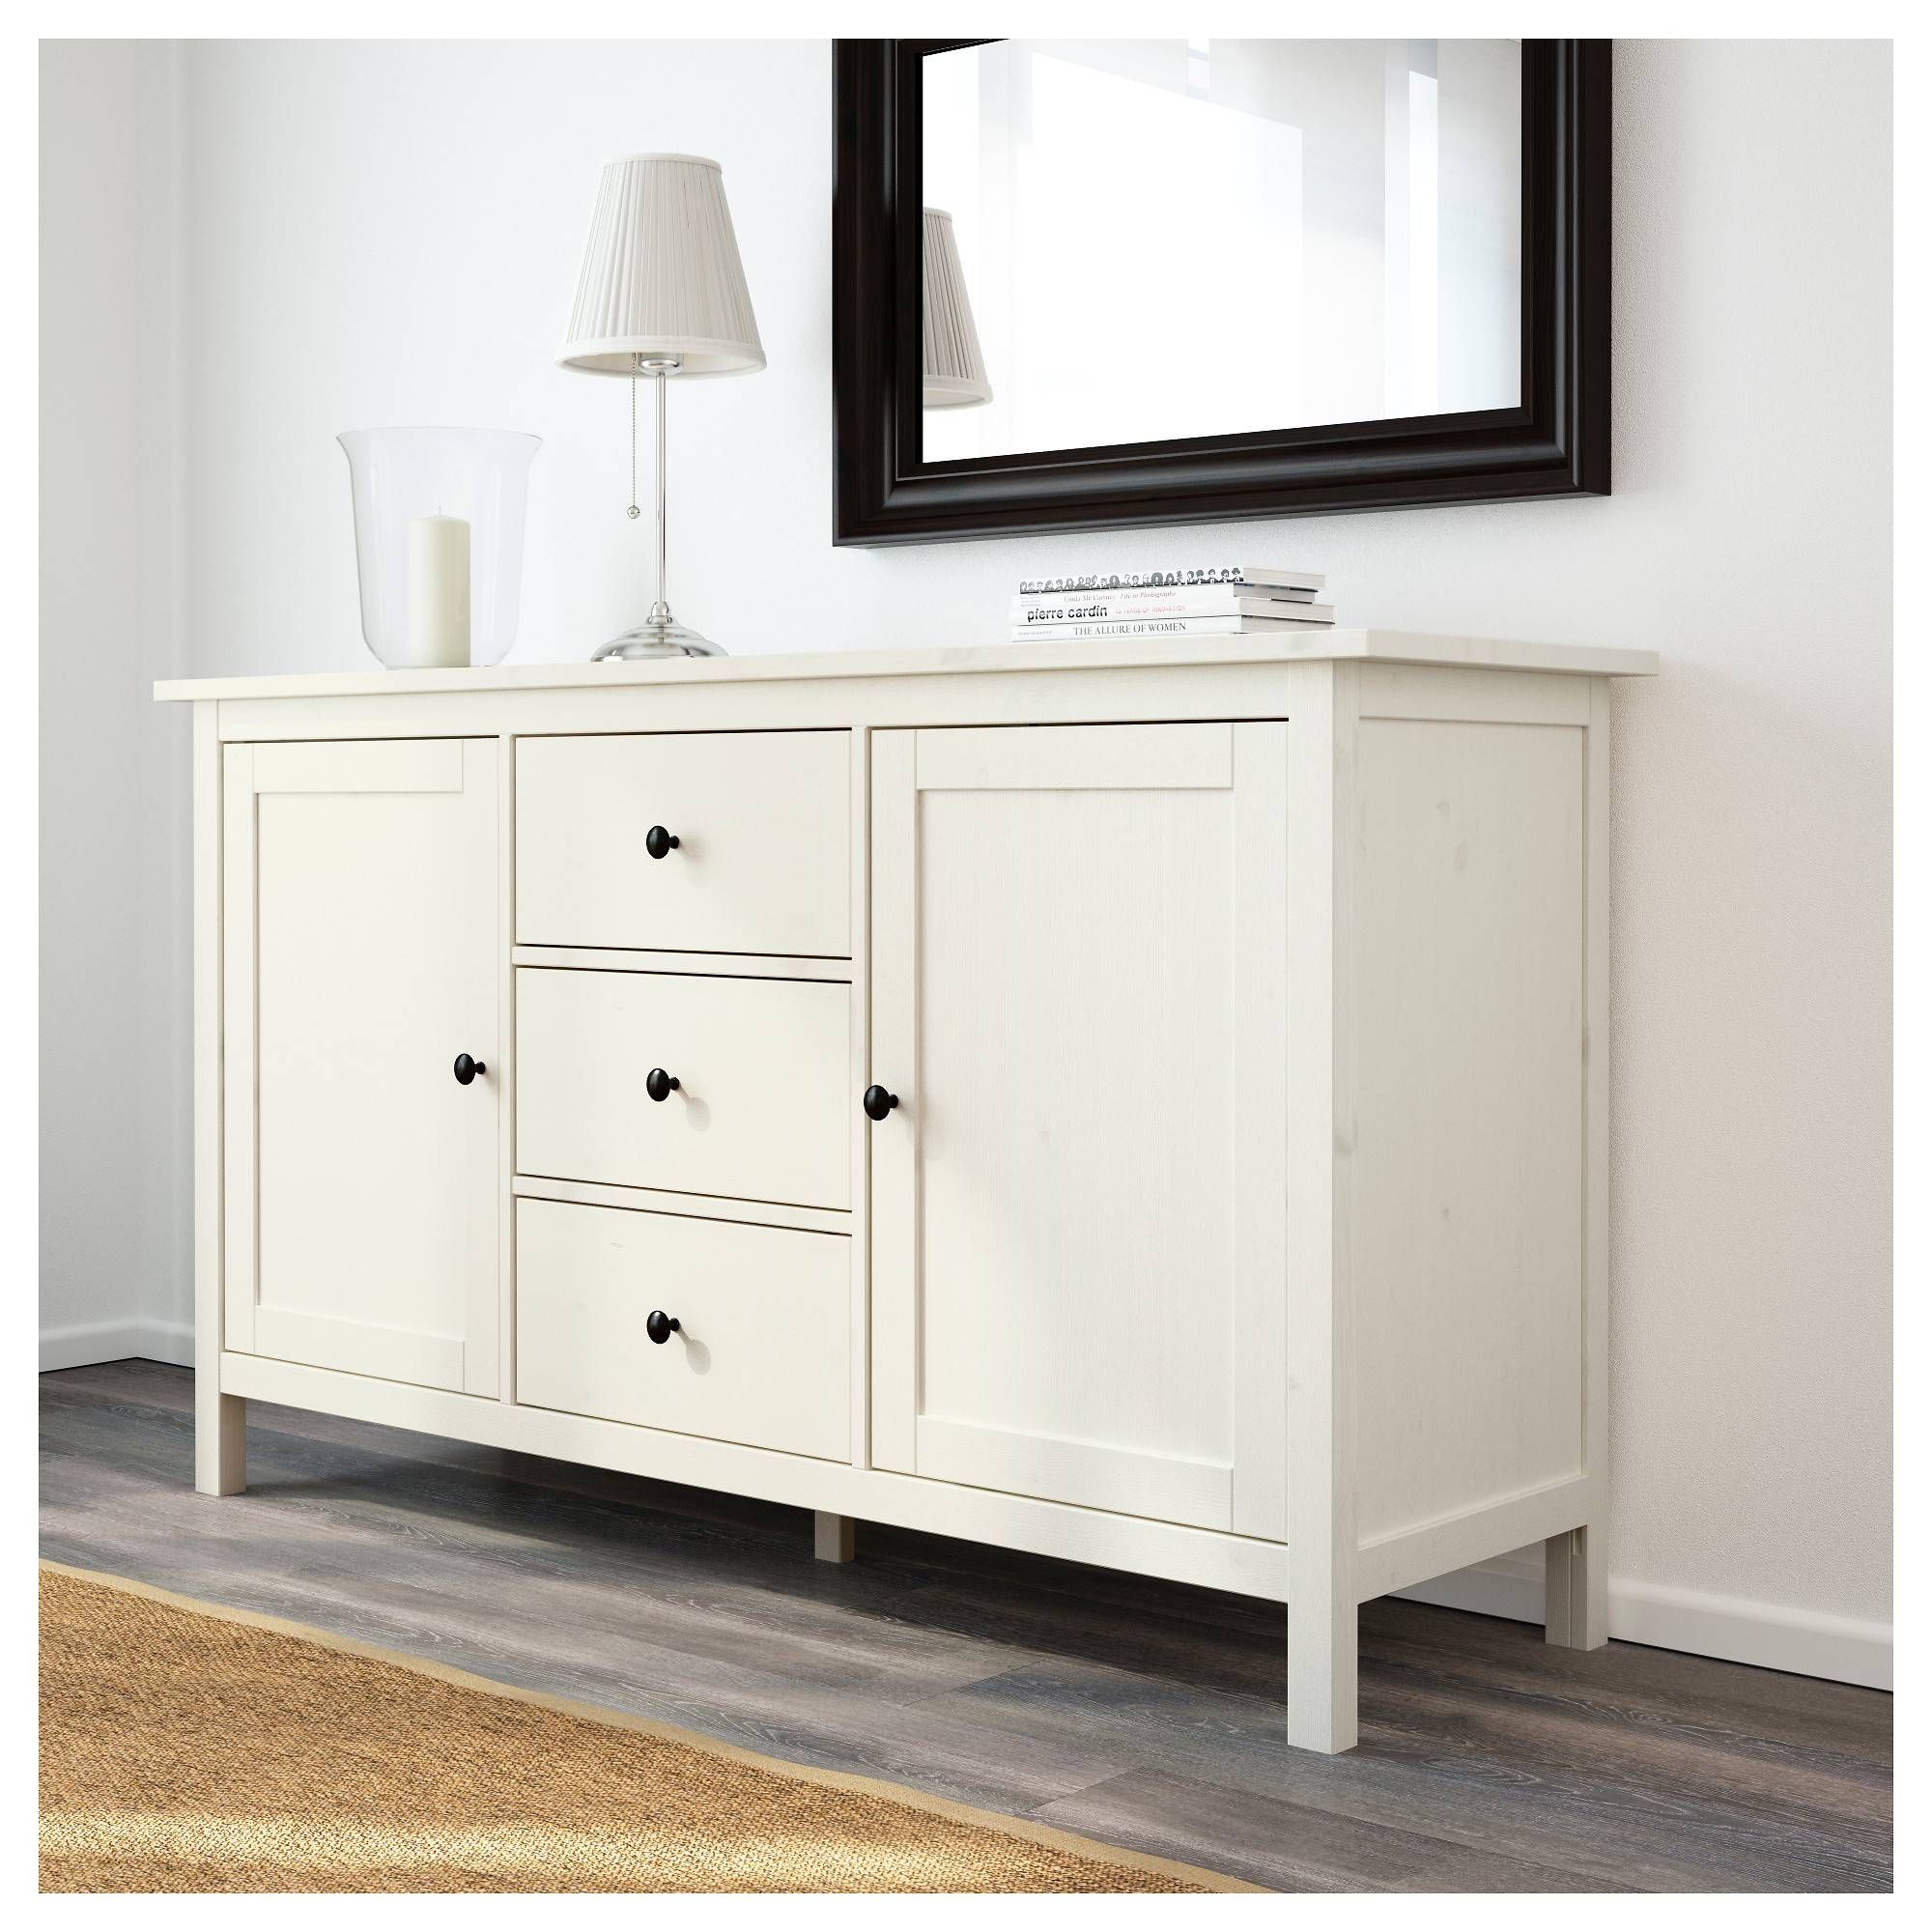 Hemnes Sideboard – Black Brown – Ikea Within Best And Newest Canada Ikea Sideboards (View 11 of 15)